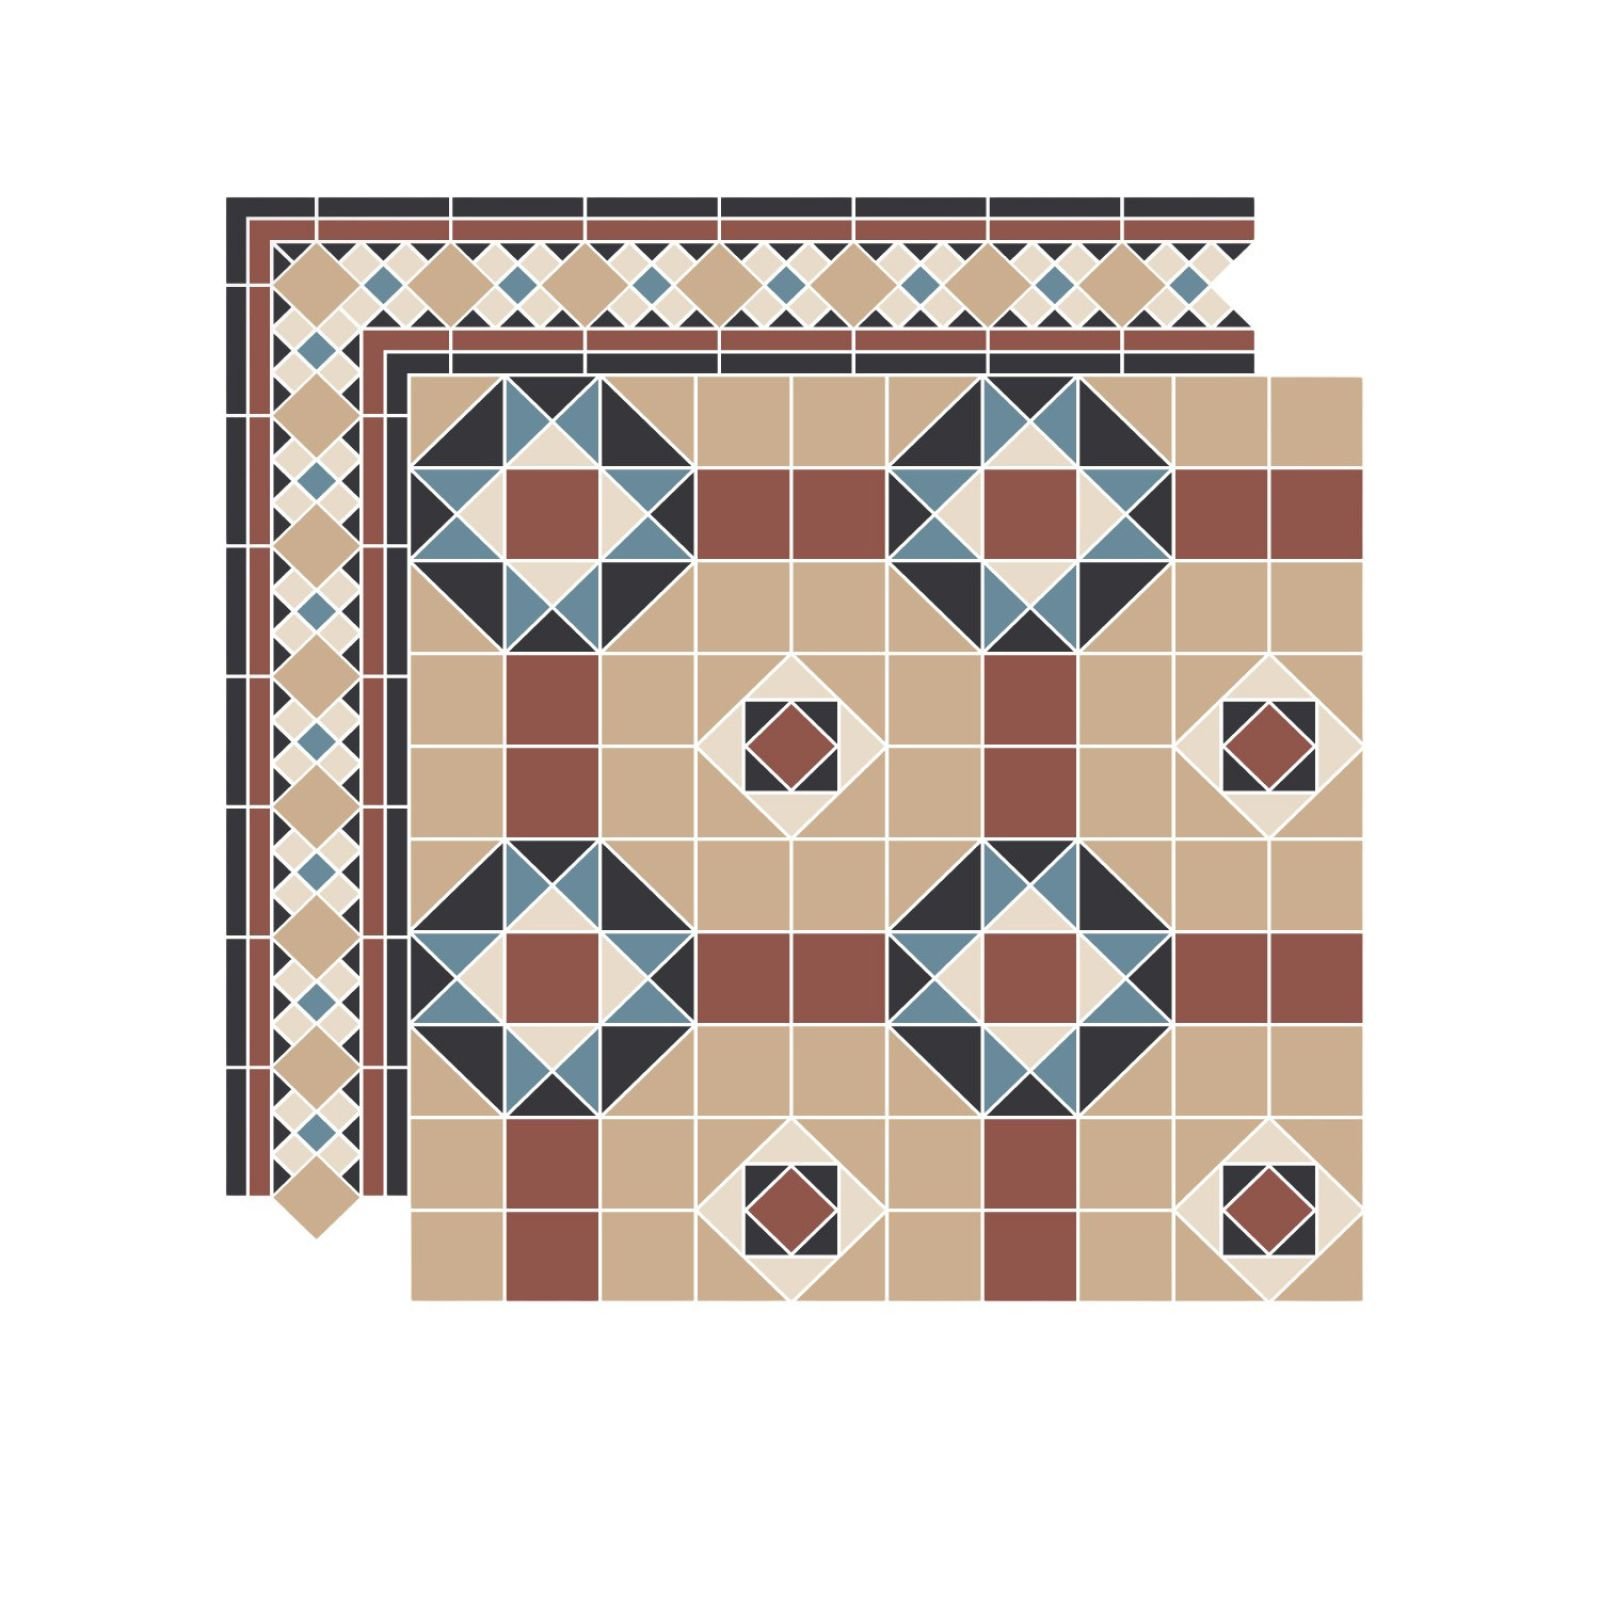 Oxford Victorian Mosaic Floor Tiles - corners and borders